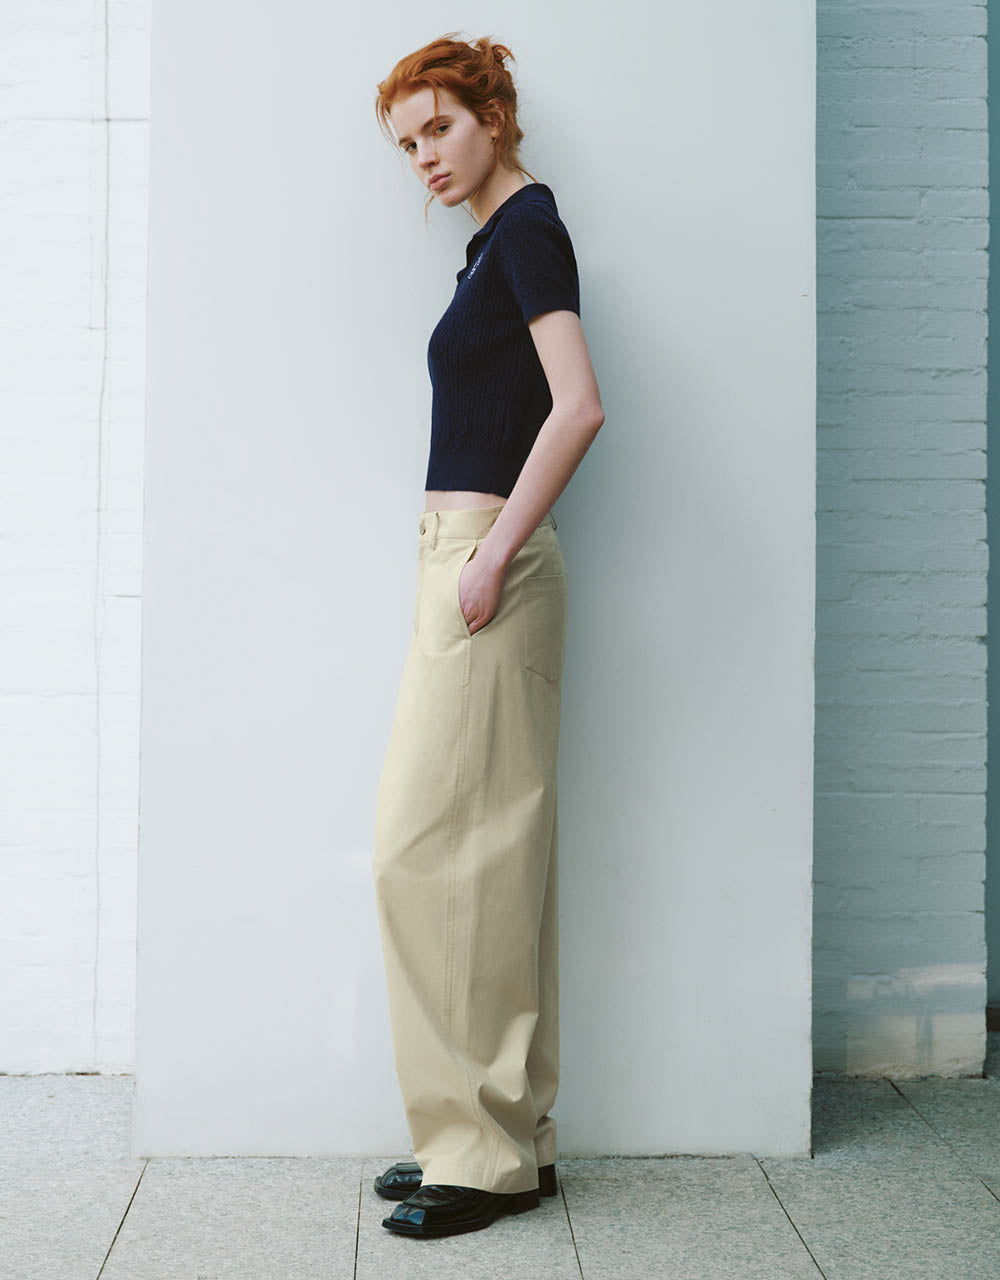 Loose Carrot Fit Pants